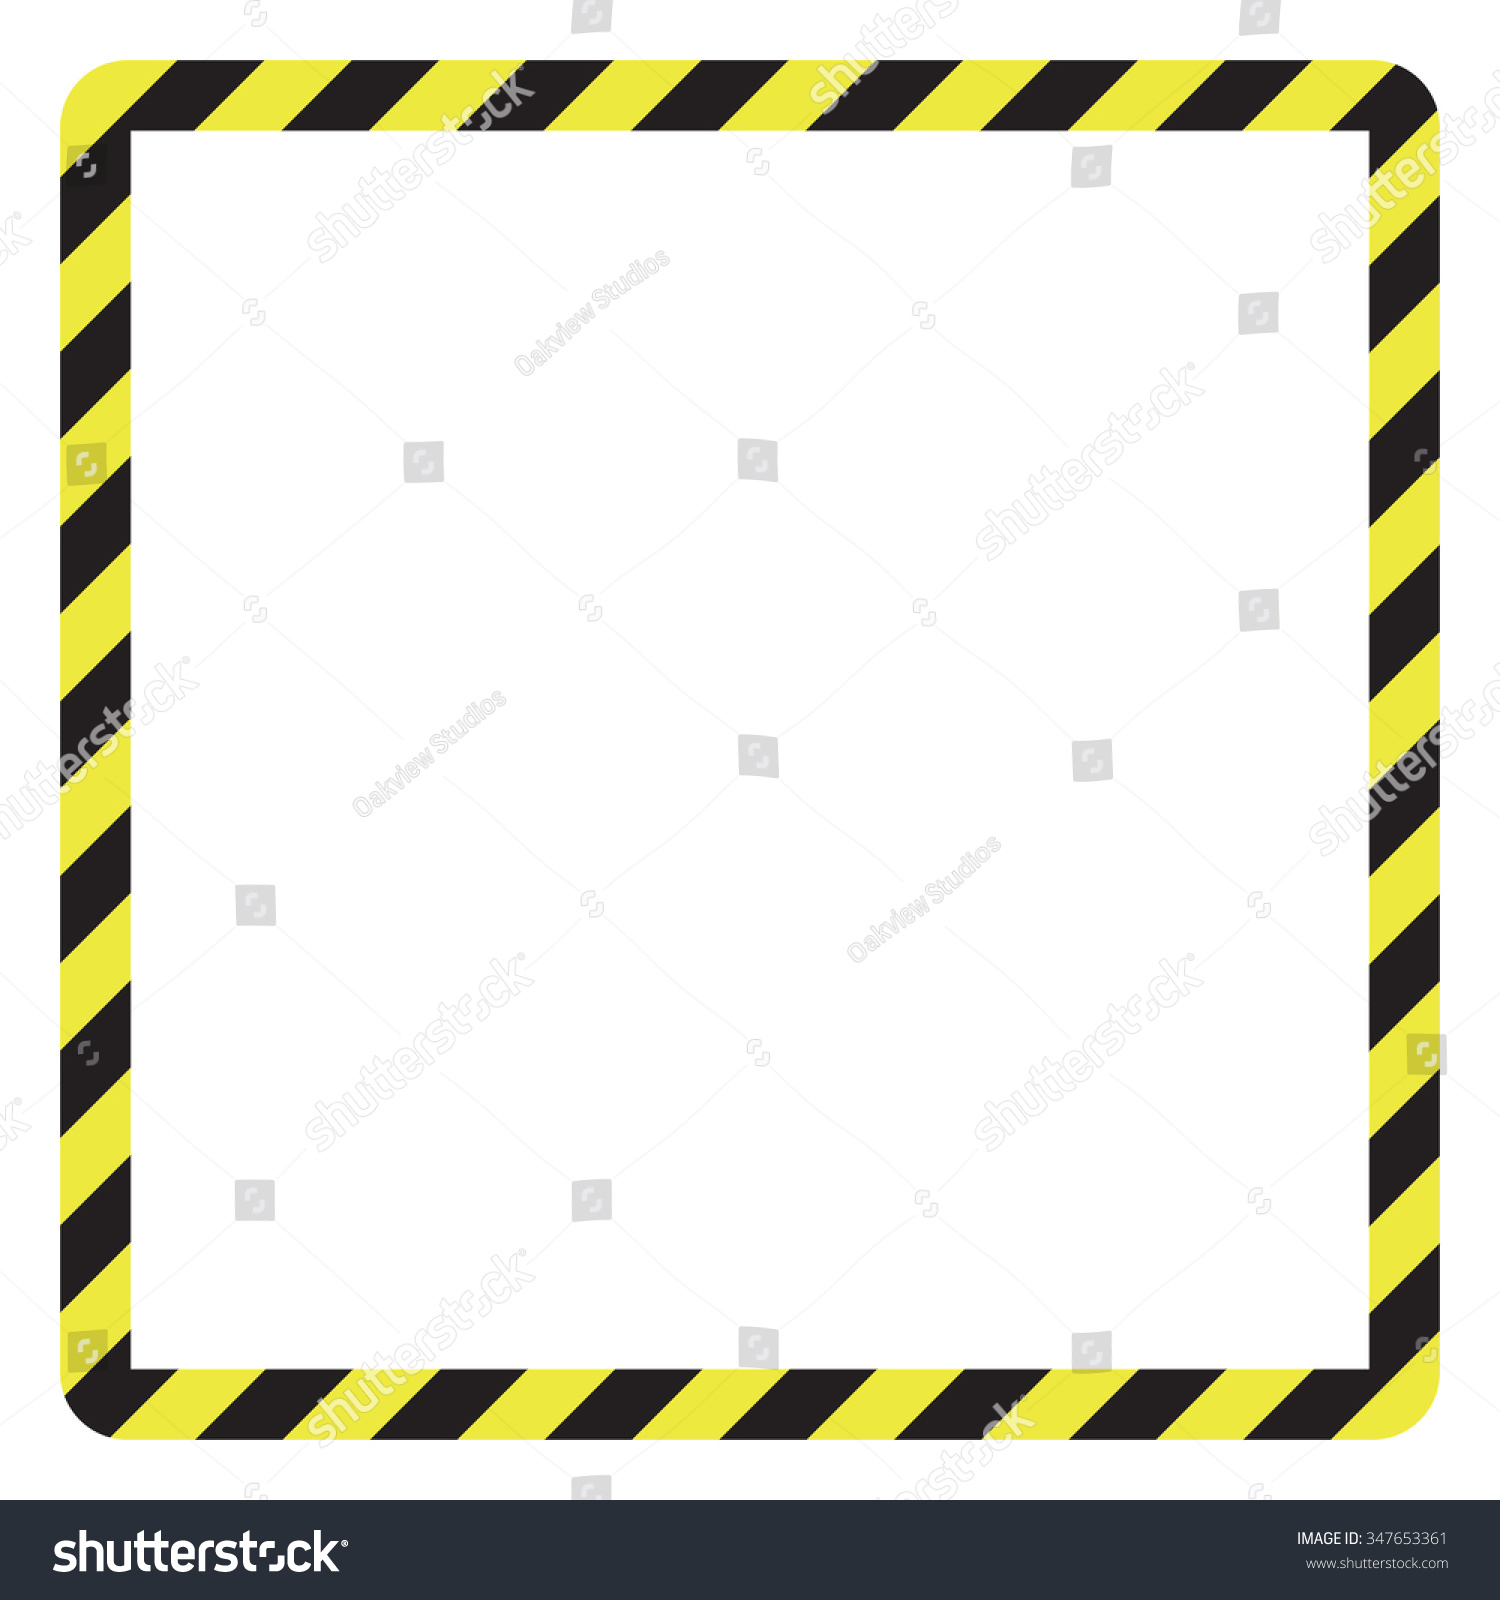 Caution Tape PNG Border - 165996